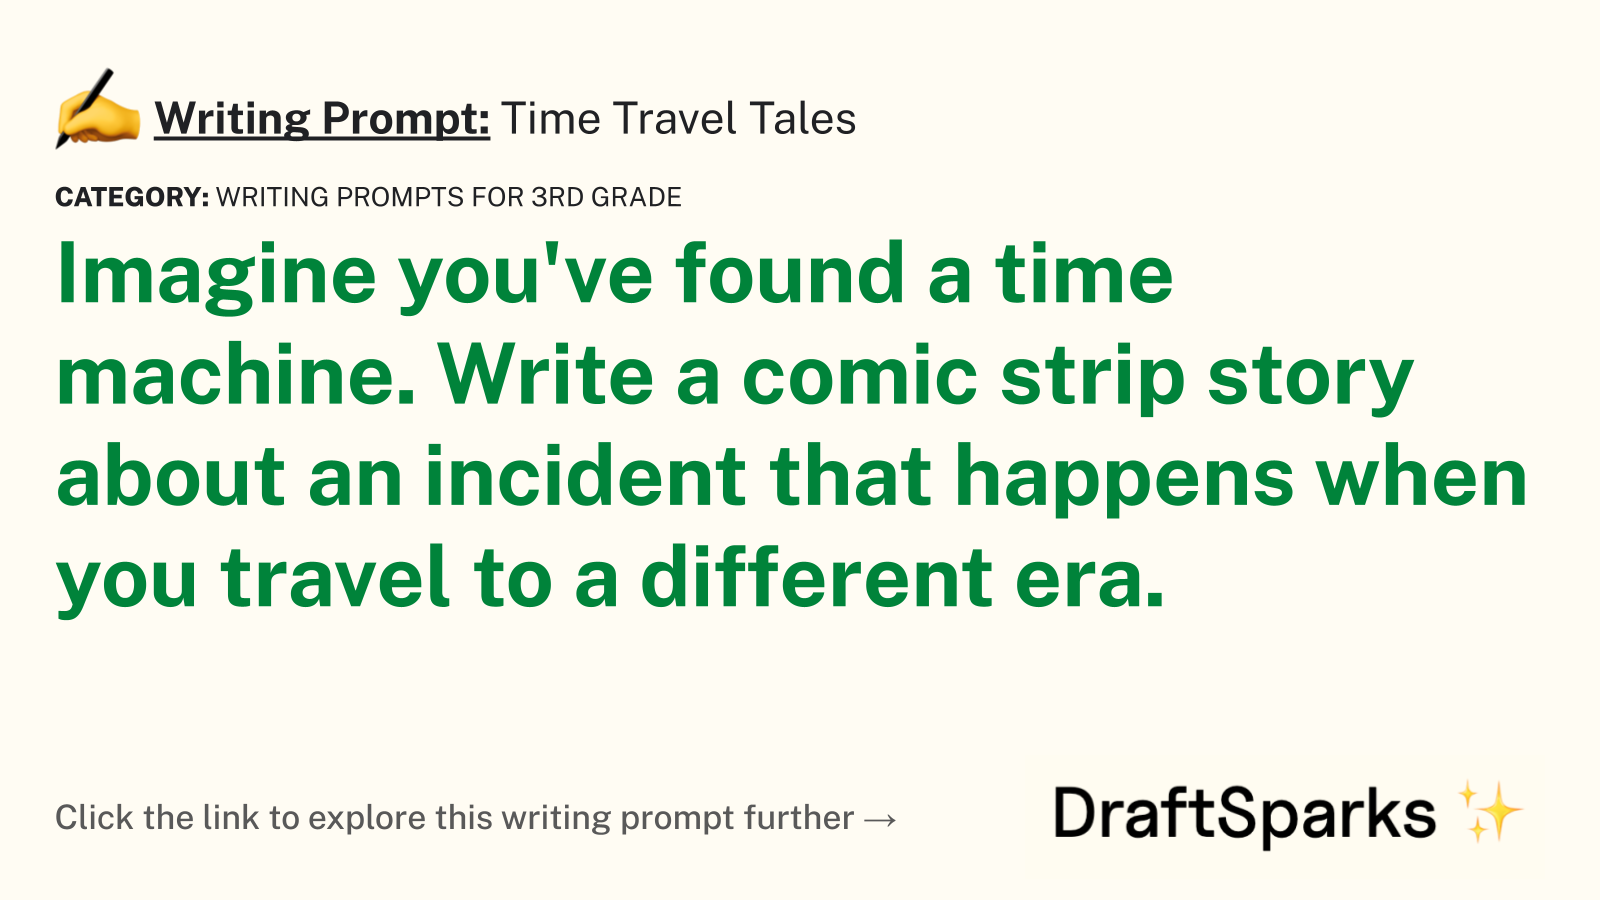 Time Travel Tales